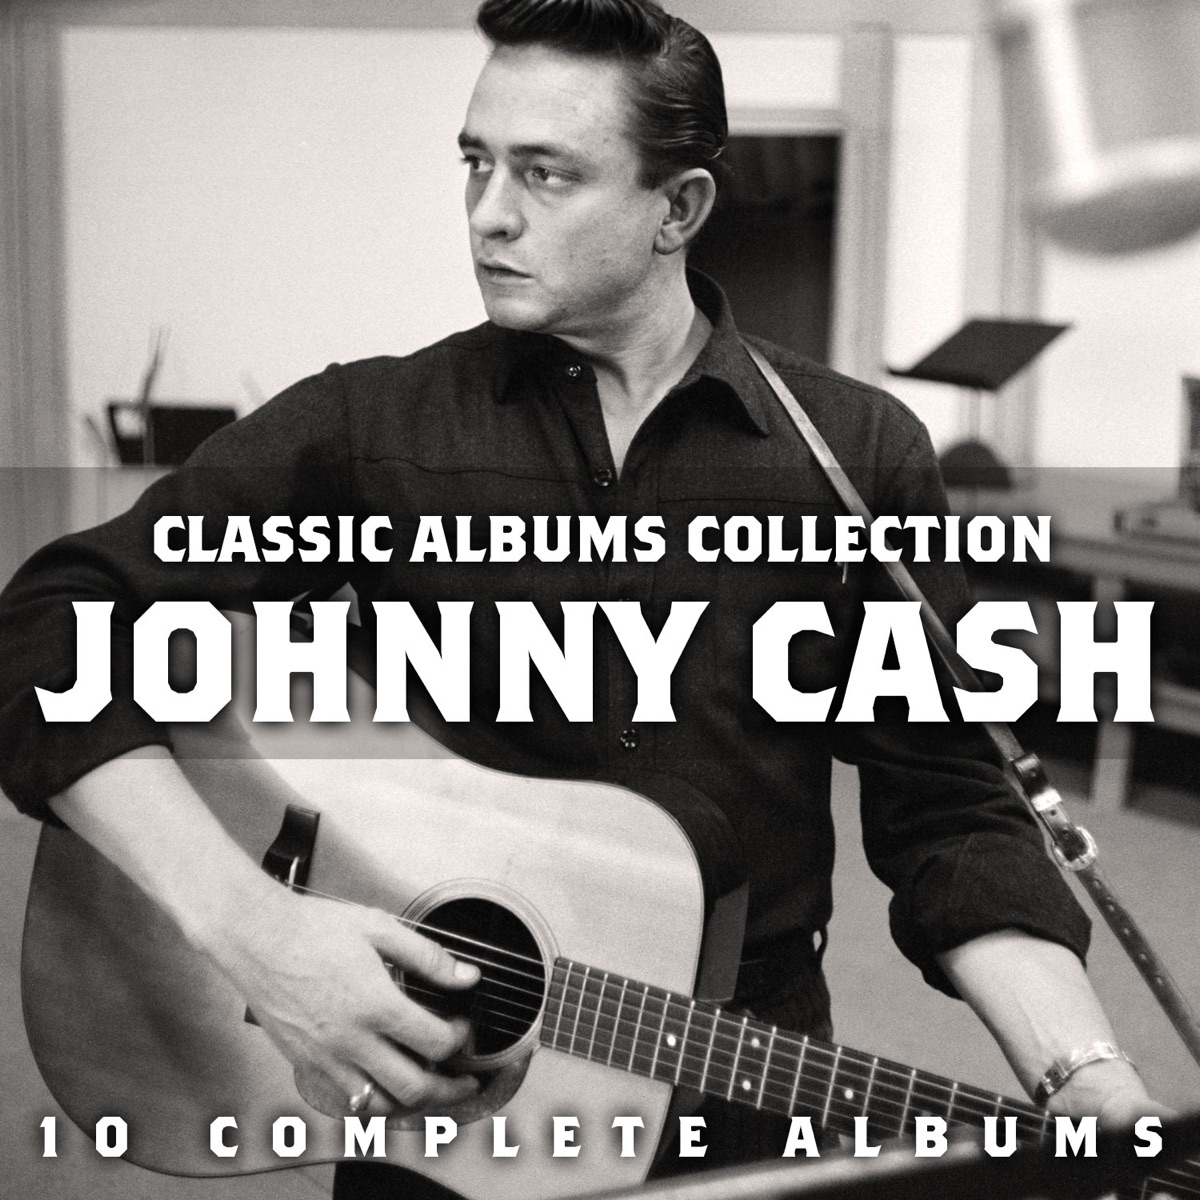 The Classic Albums Collection - Album by Johnny Cash - Apple Music